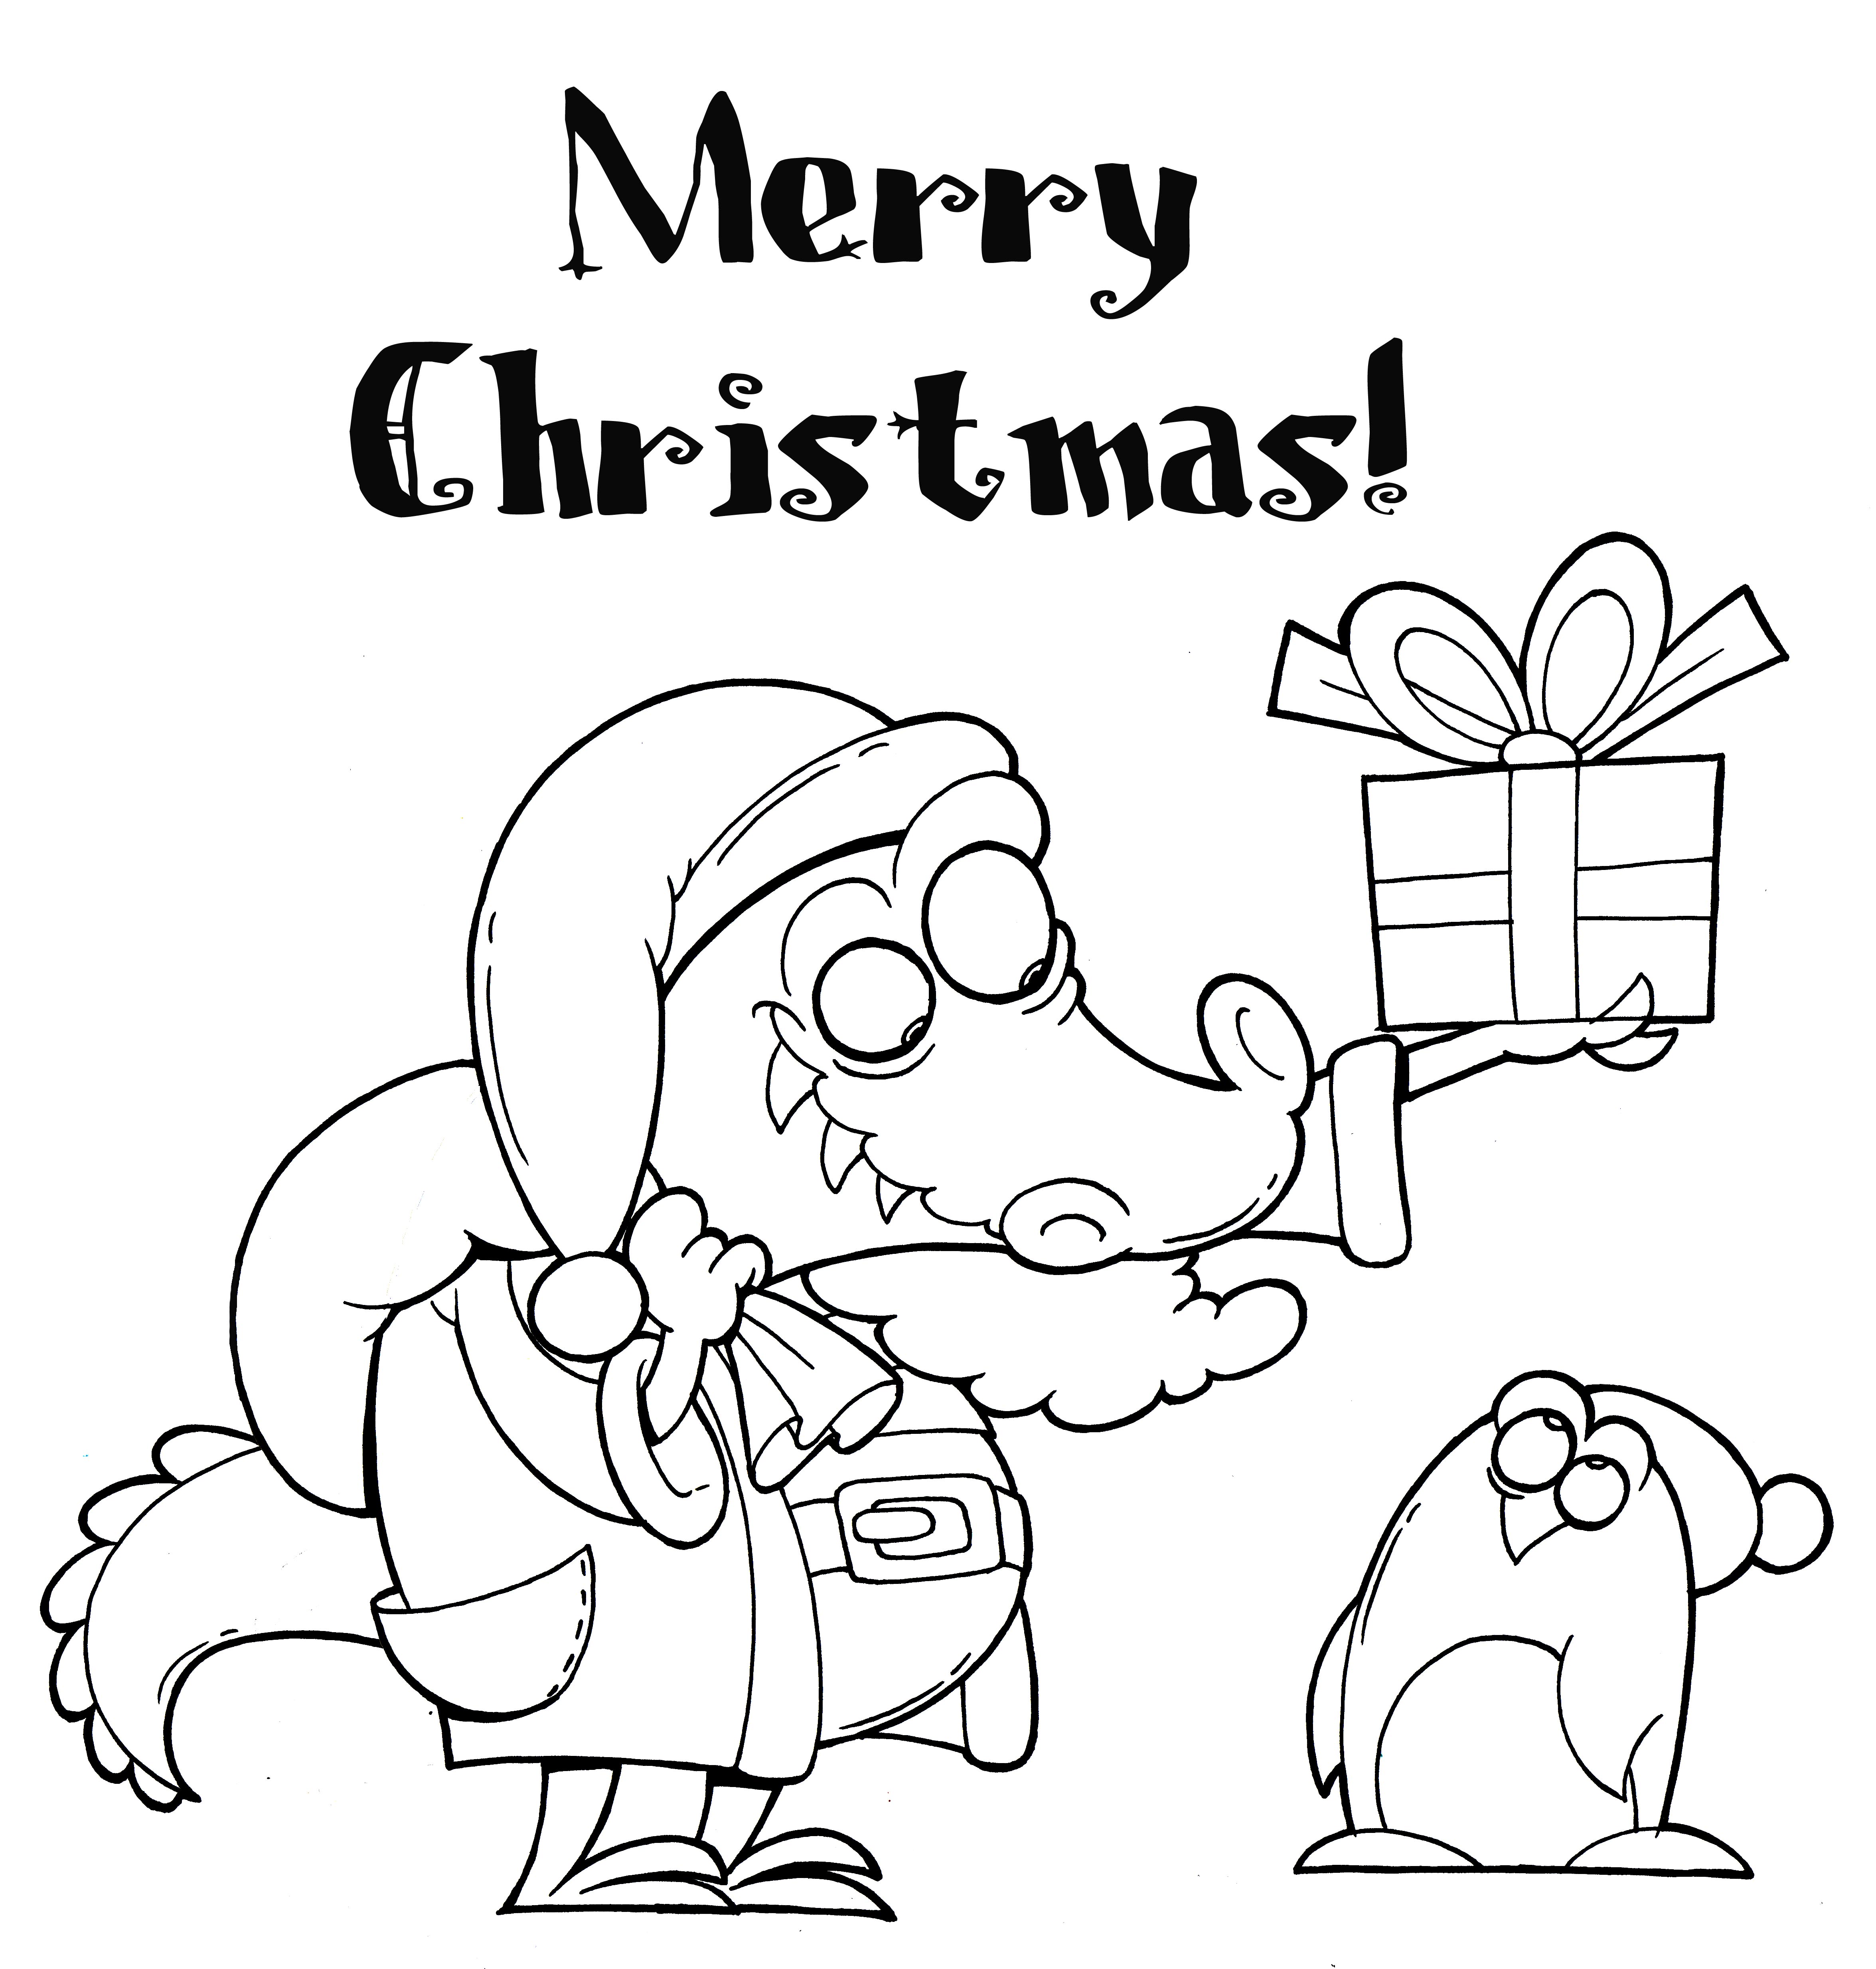 Cristmas Santa Claus Crocodile coloring pages black and white